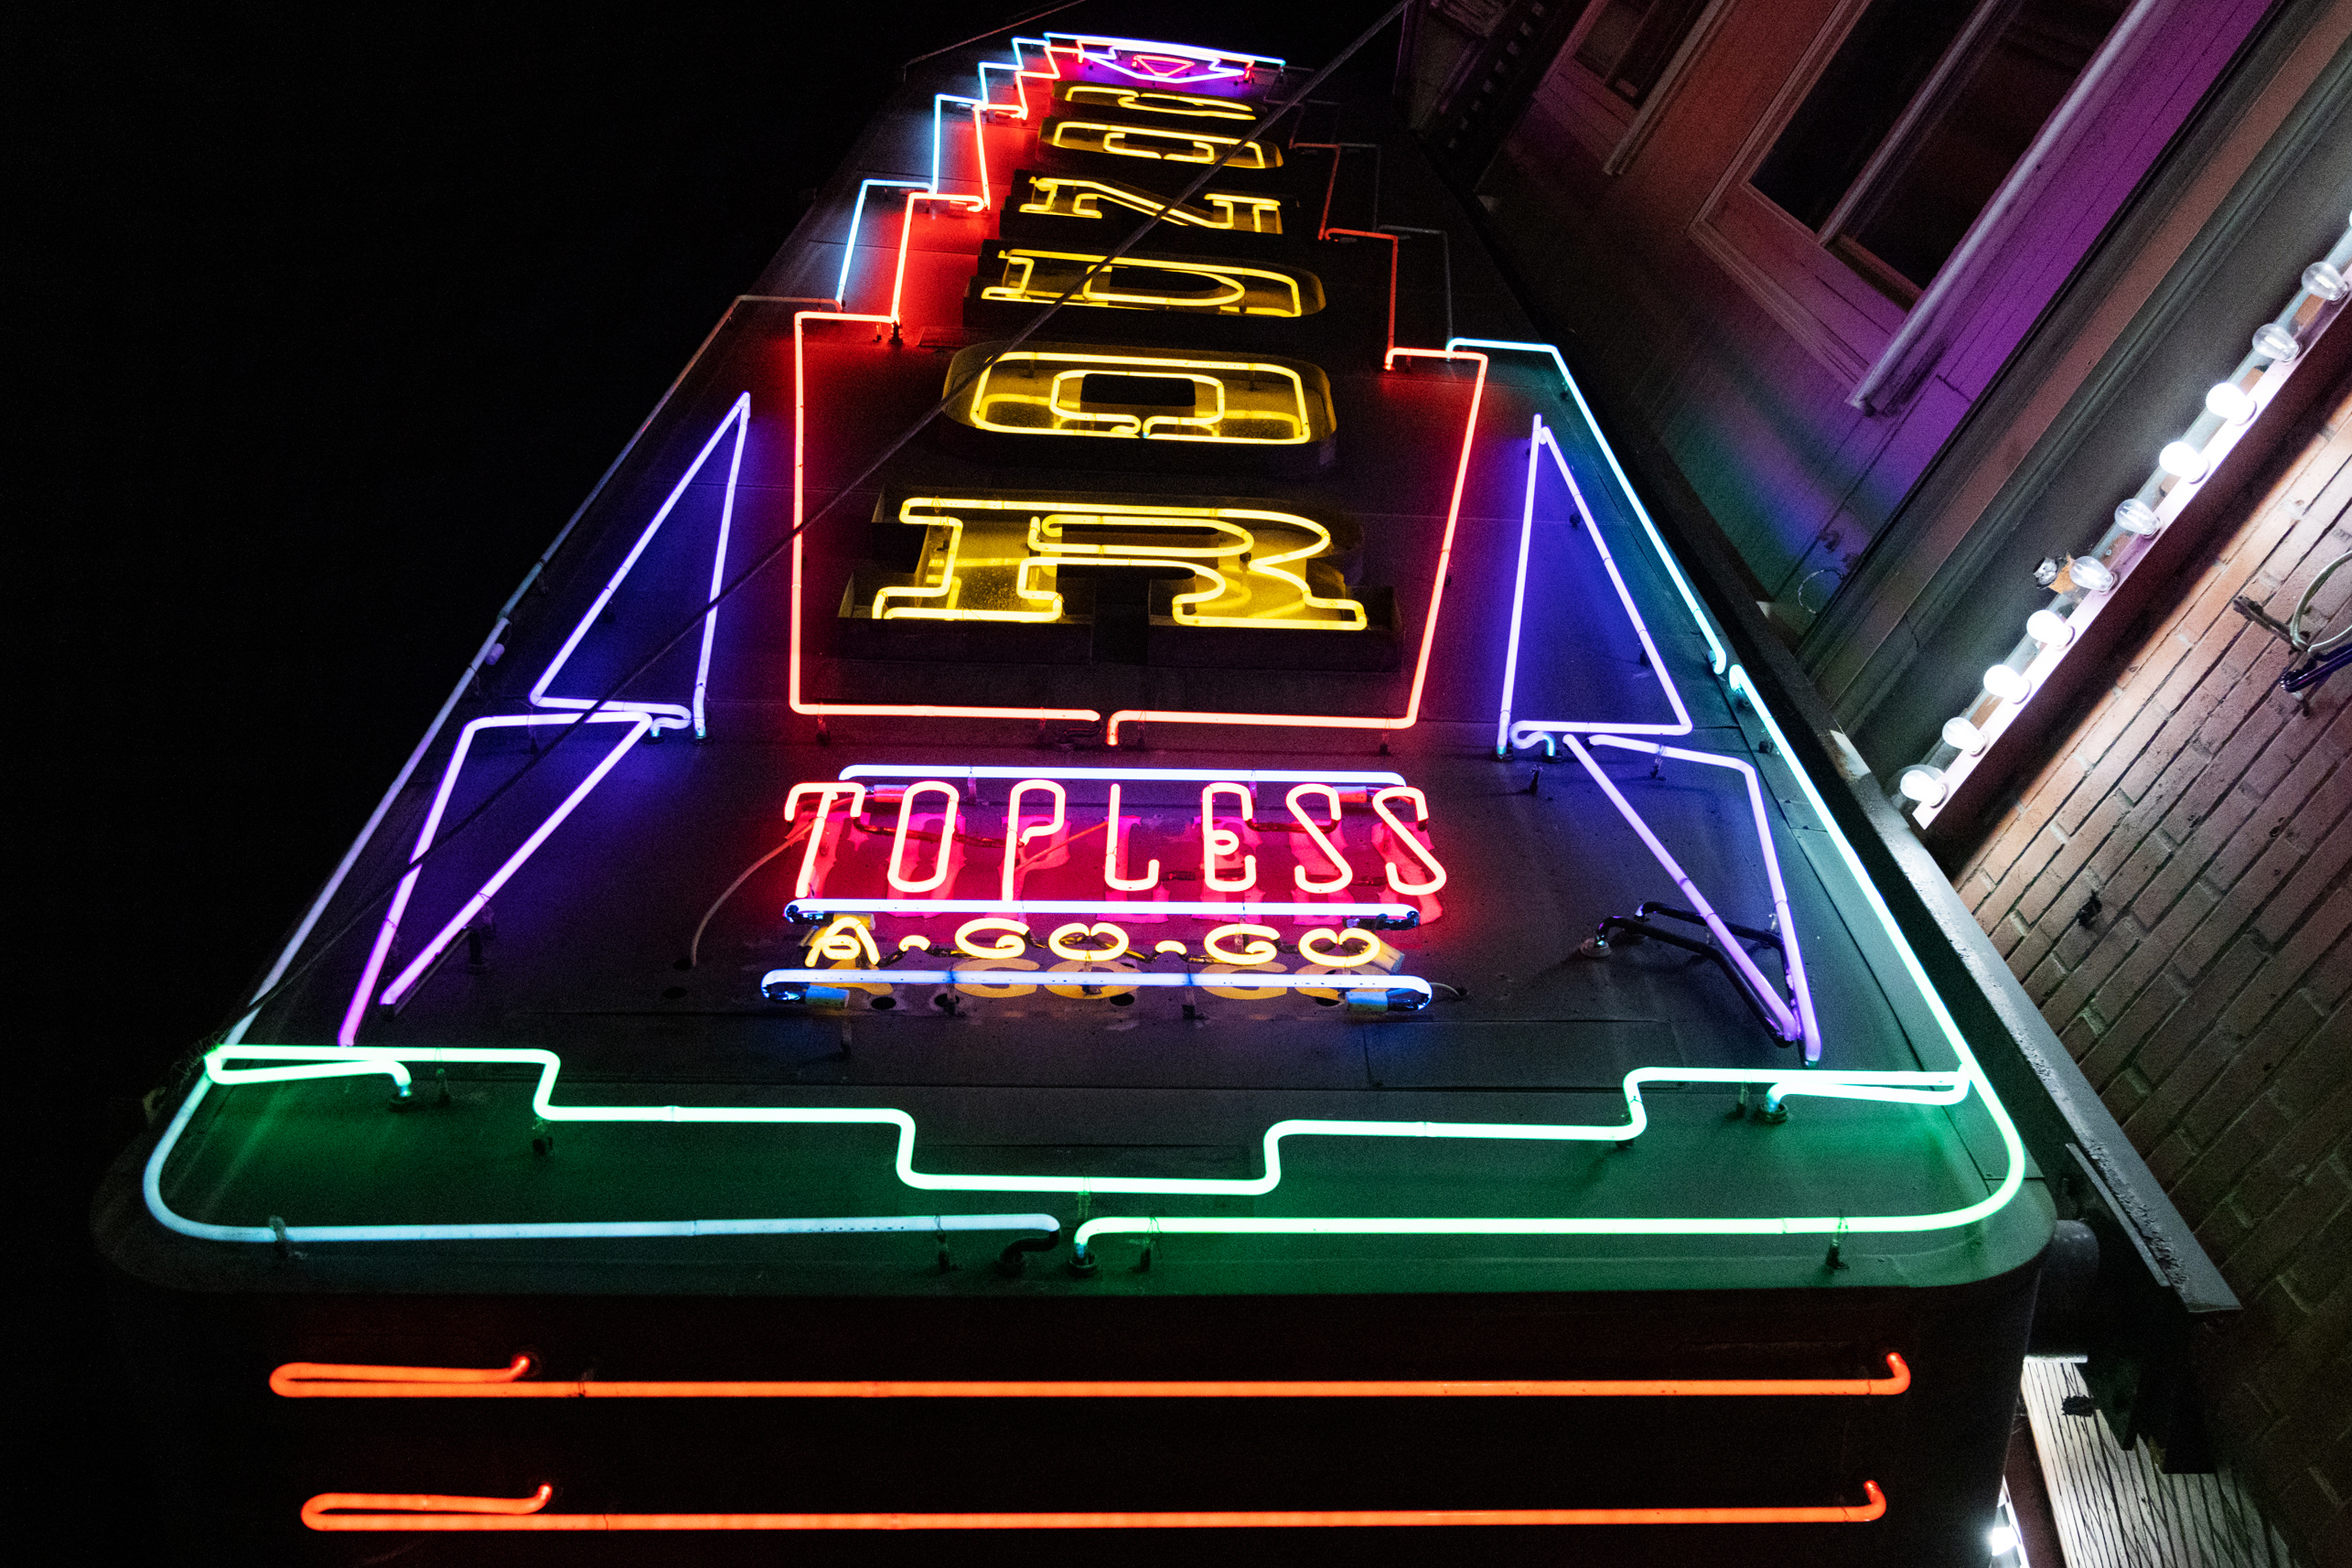 A neon sign at night with the words &quot;TOPLESS A GO GO&quot; and &quot;Condor&quot; on a tall neon sign.